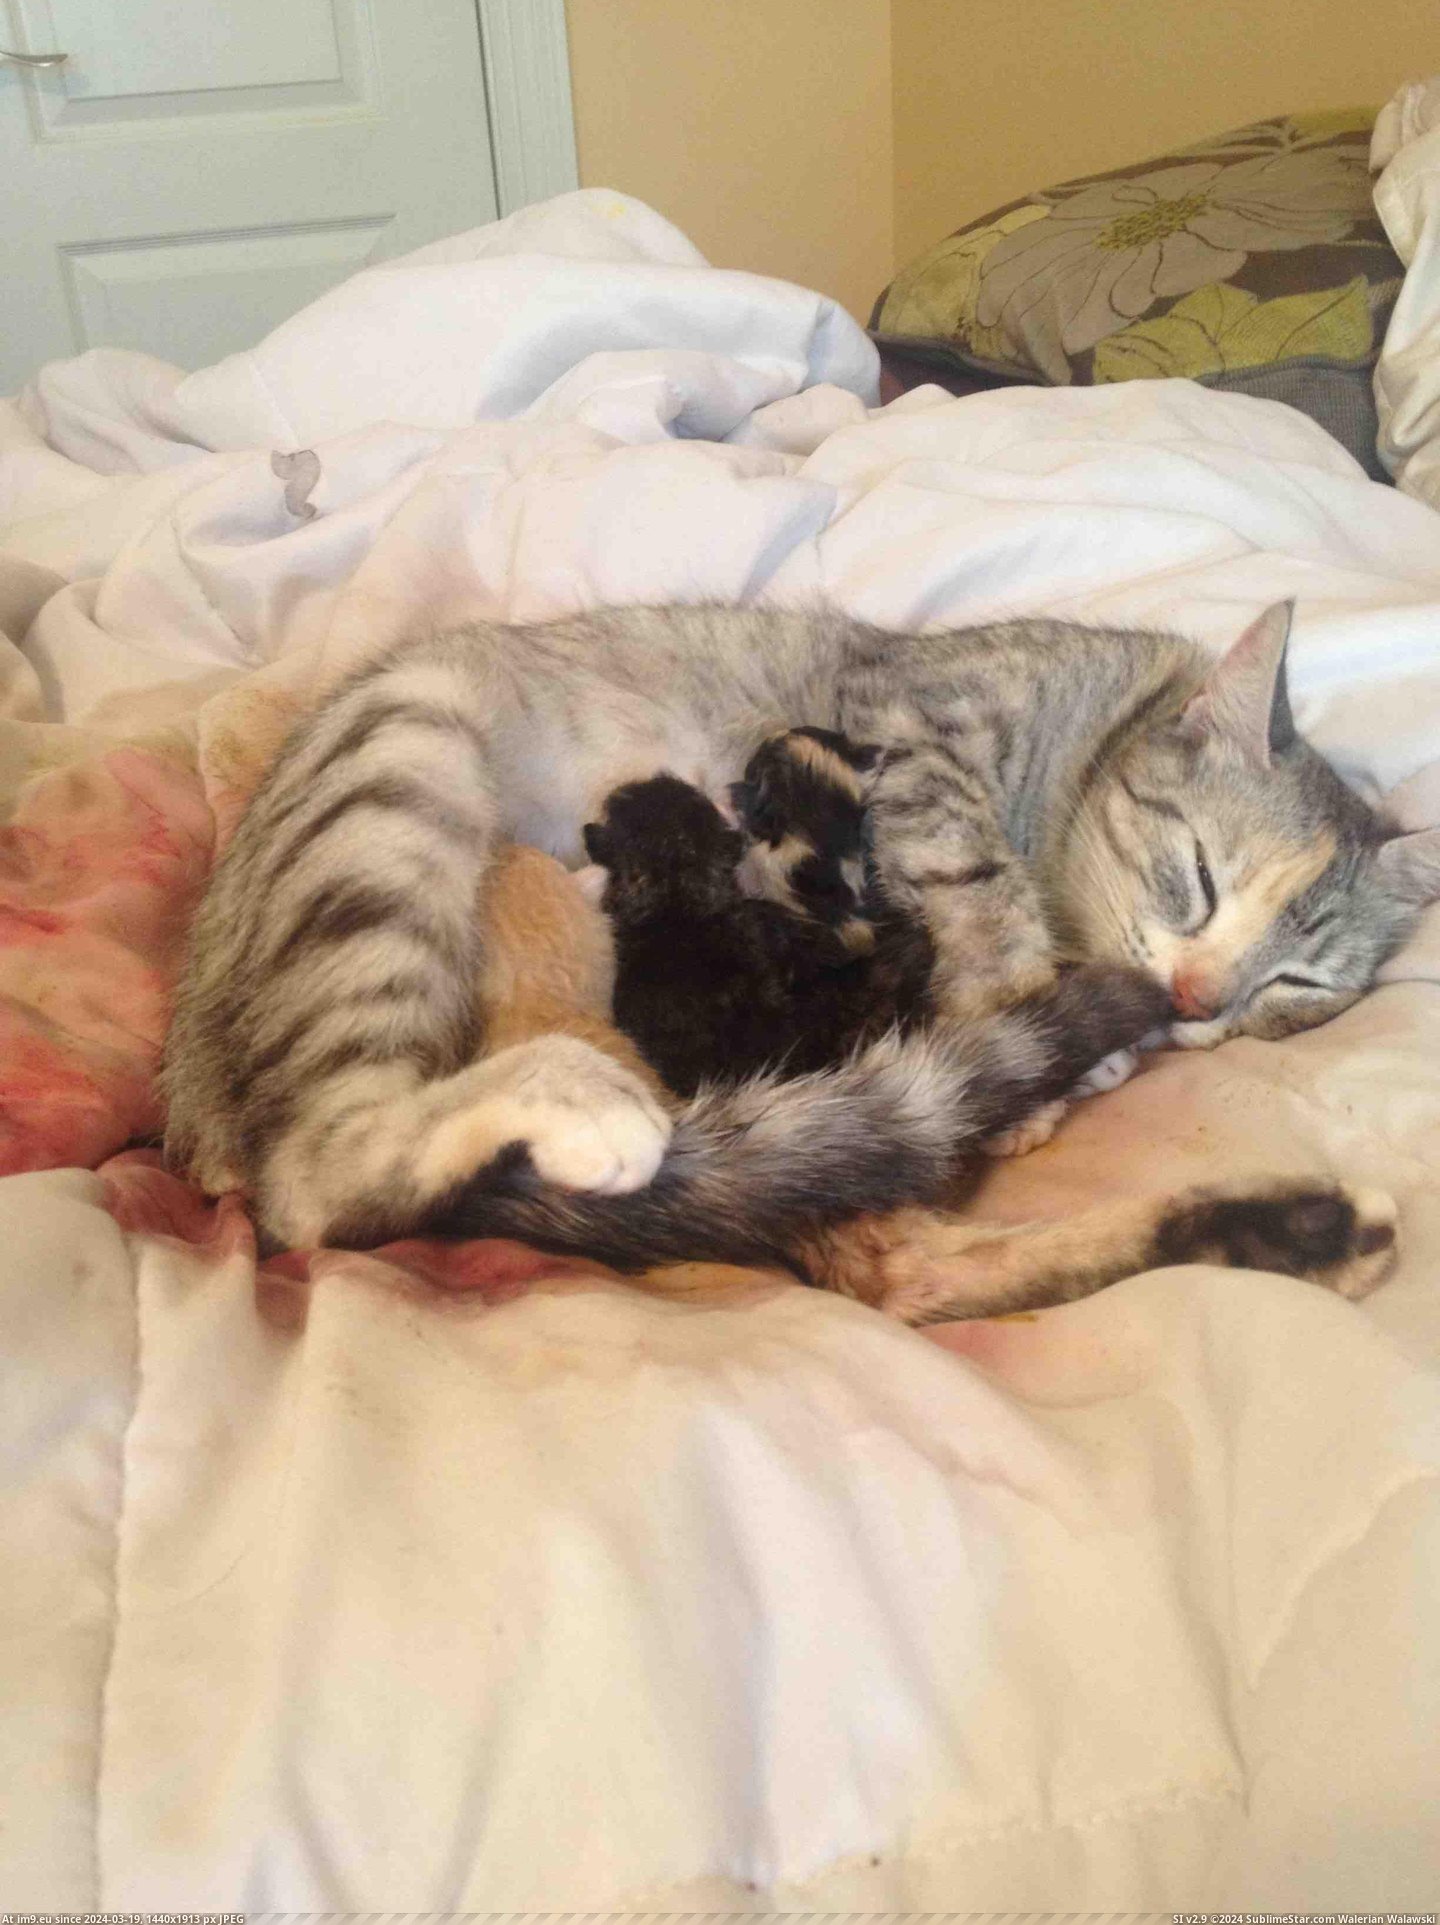 #You #Cat #Bed #She #Wake #Babies #Joking #Can #Had #Find #Guess [Aww] I've been joking that I will wake up and find my cat had her babies in bed with me. I'm sure you can guess where she had h Pic. (Obraz z album My r/AWW favs))